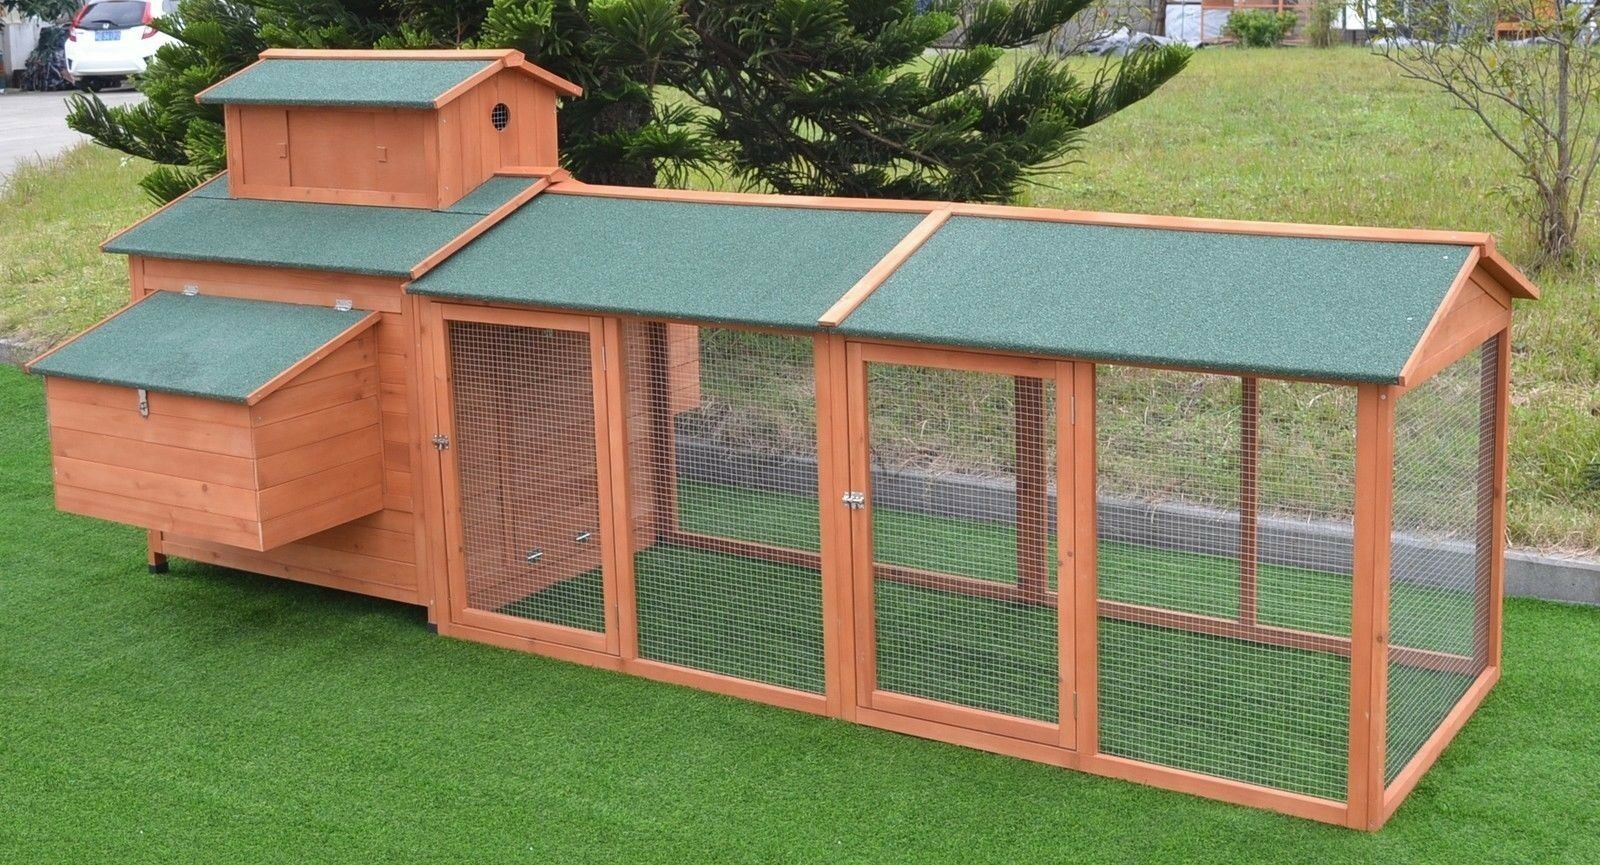 Sung-ll Impregnated Pine Wood Chicken House 1,5x1,5x2 M - Cages